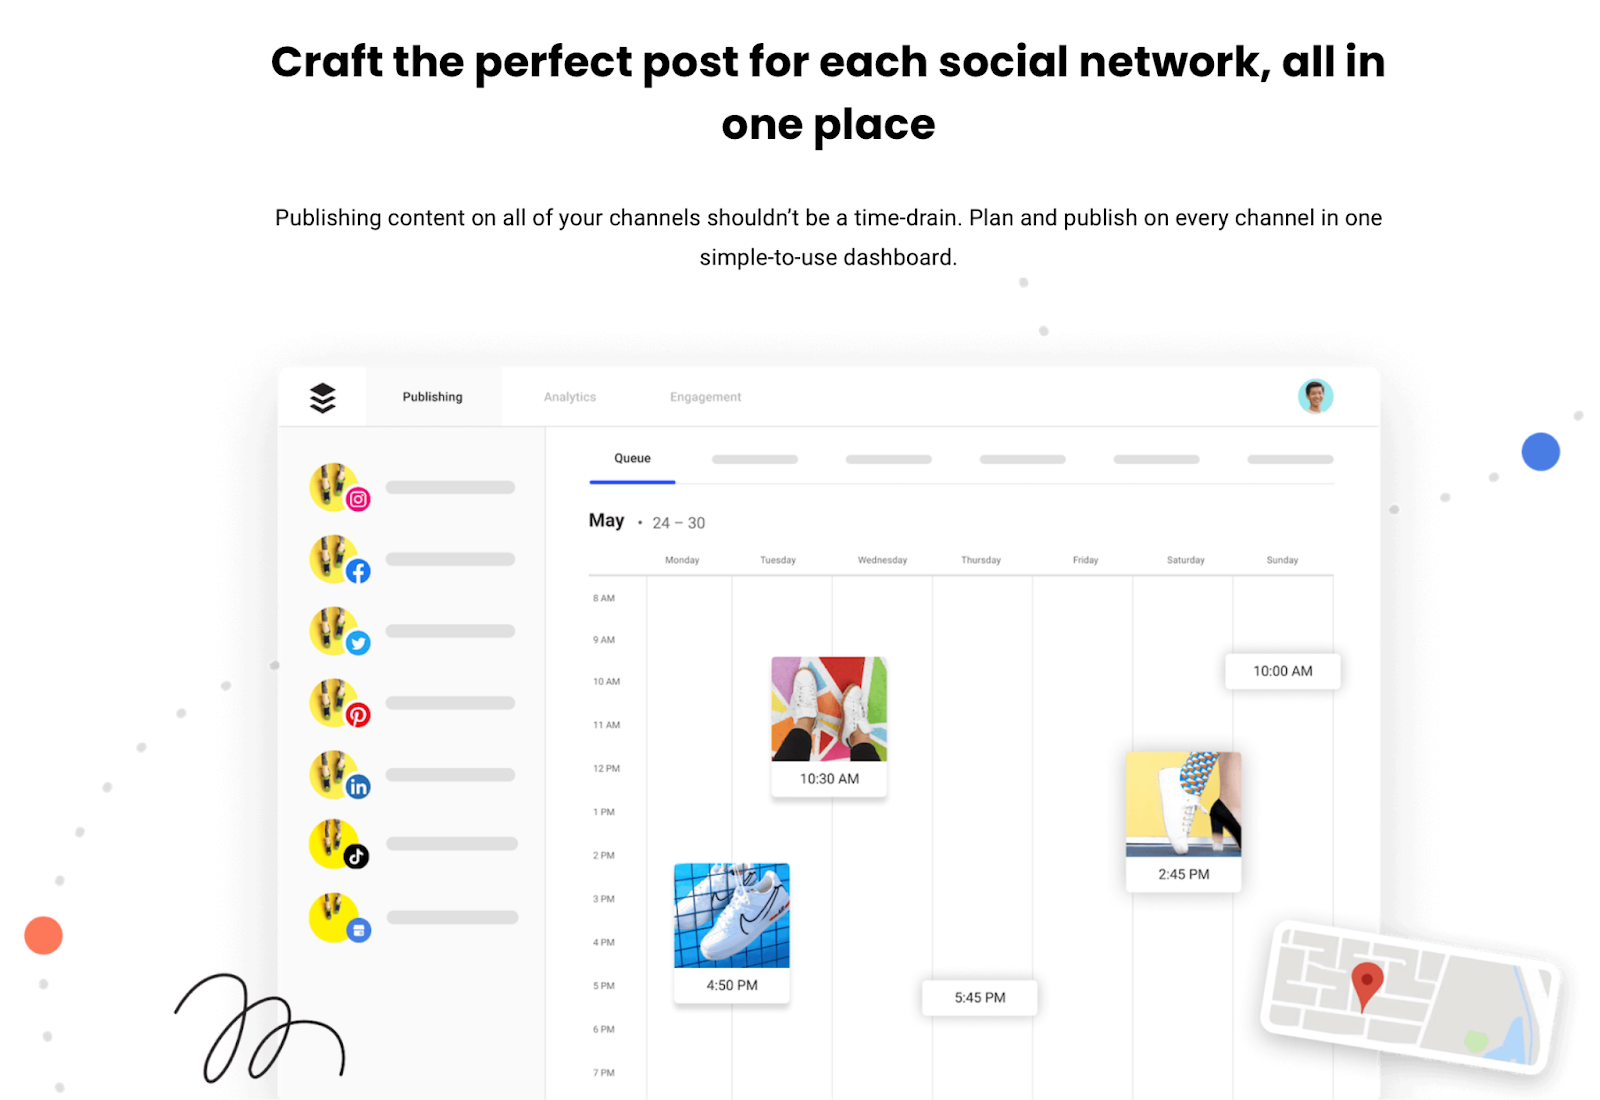 A screenshot of what users can use Buffer for. The webpage is headed by "Craft the perfect post for each social network, all in one place". An image below illustrates this "one place" and shows what the dashboard would look like.